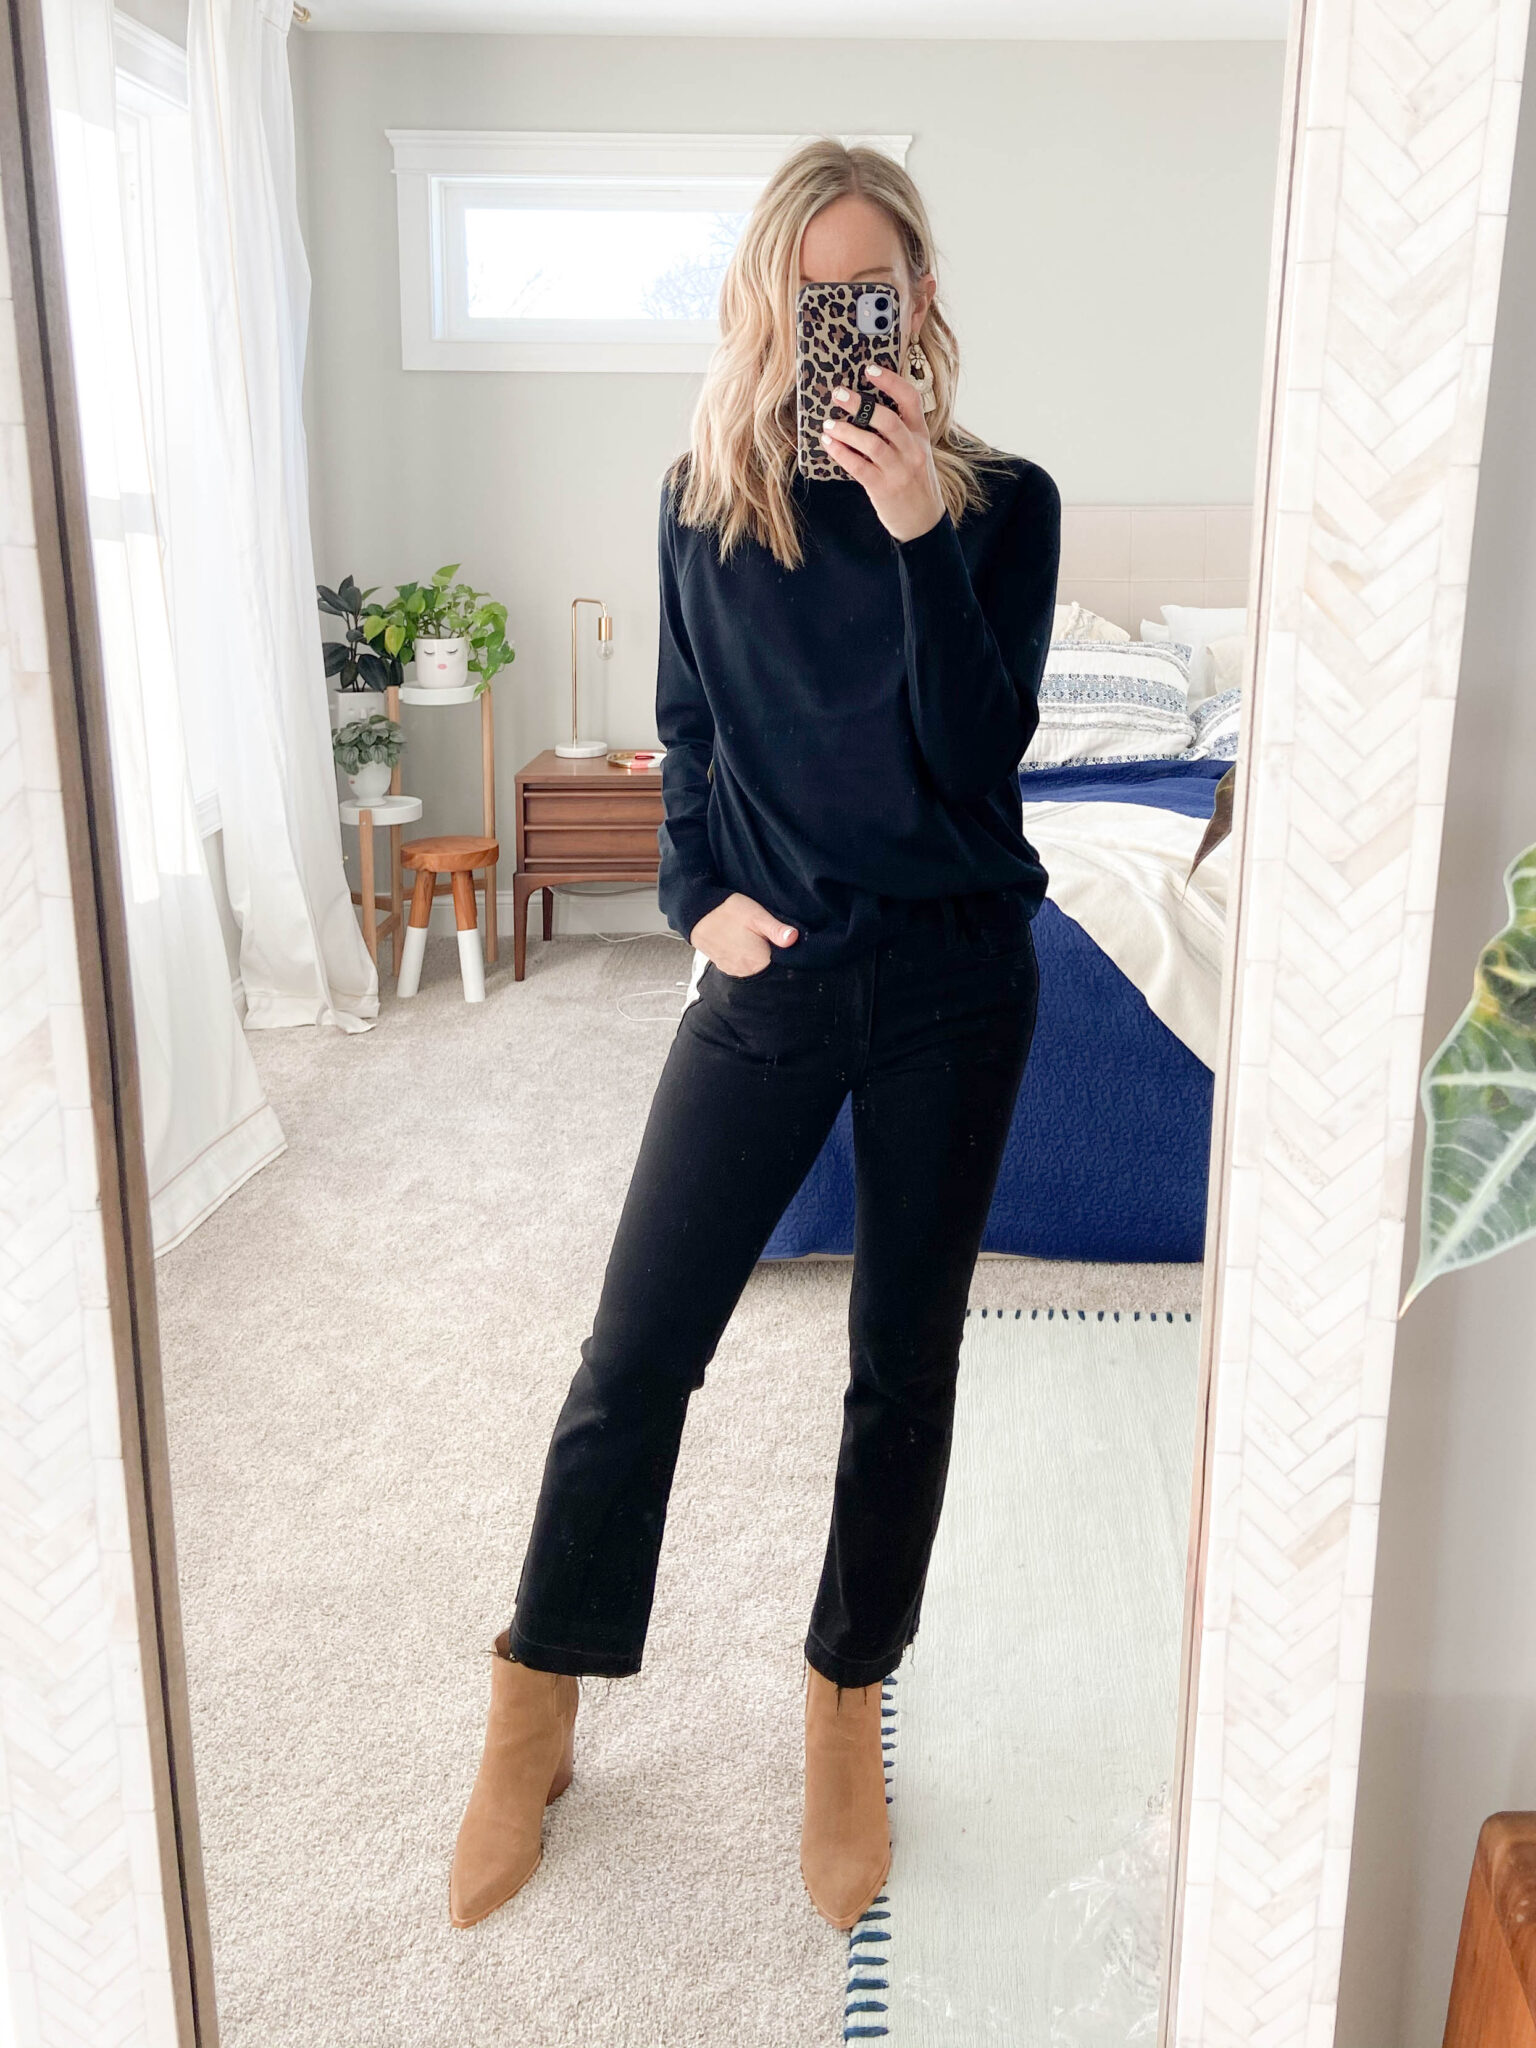 How to Wear Ankle Boots with Straight Leg Jeans